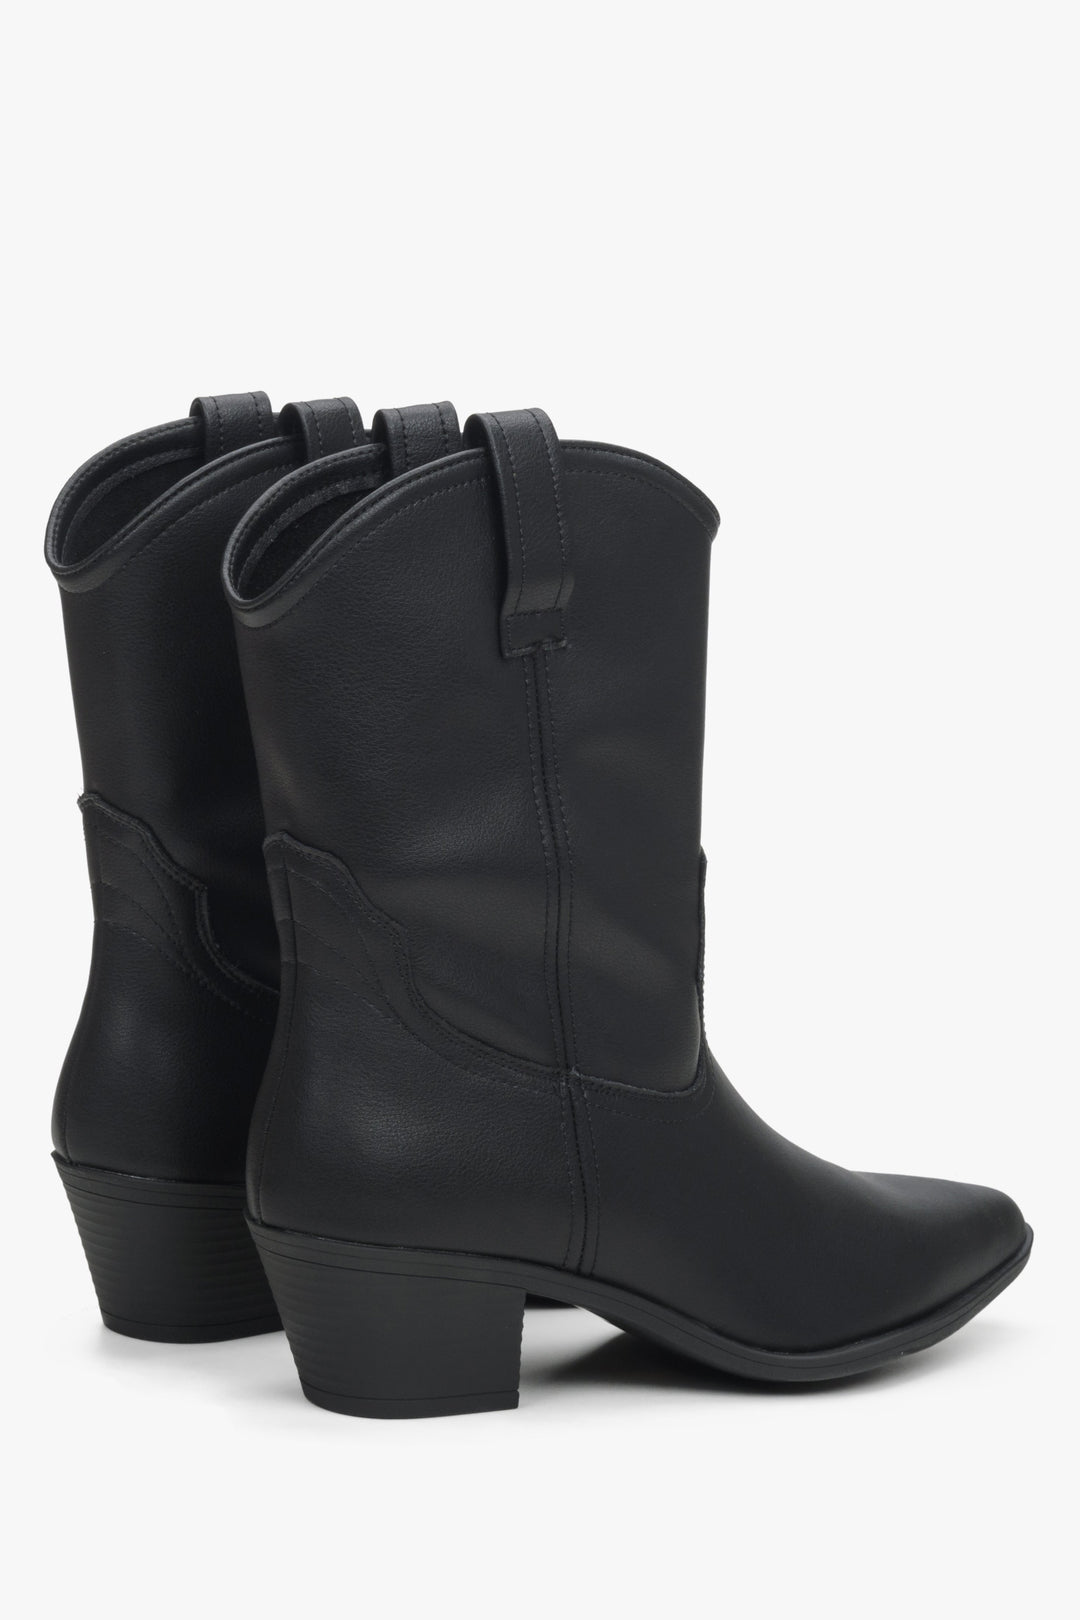 Women's black Cowboy boots - presentation of a shoe toe and sideline.